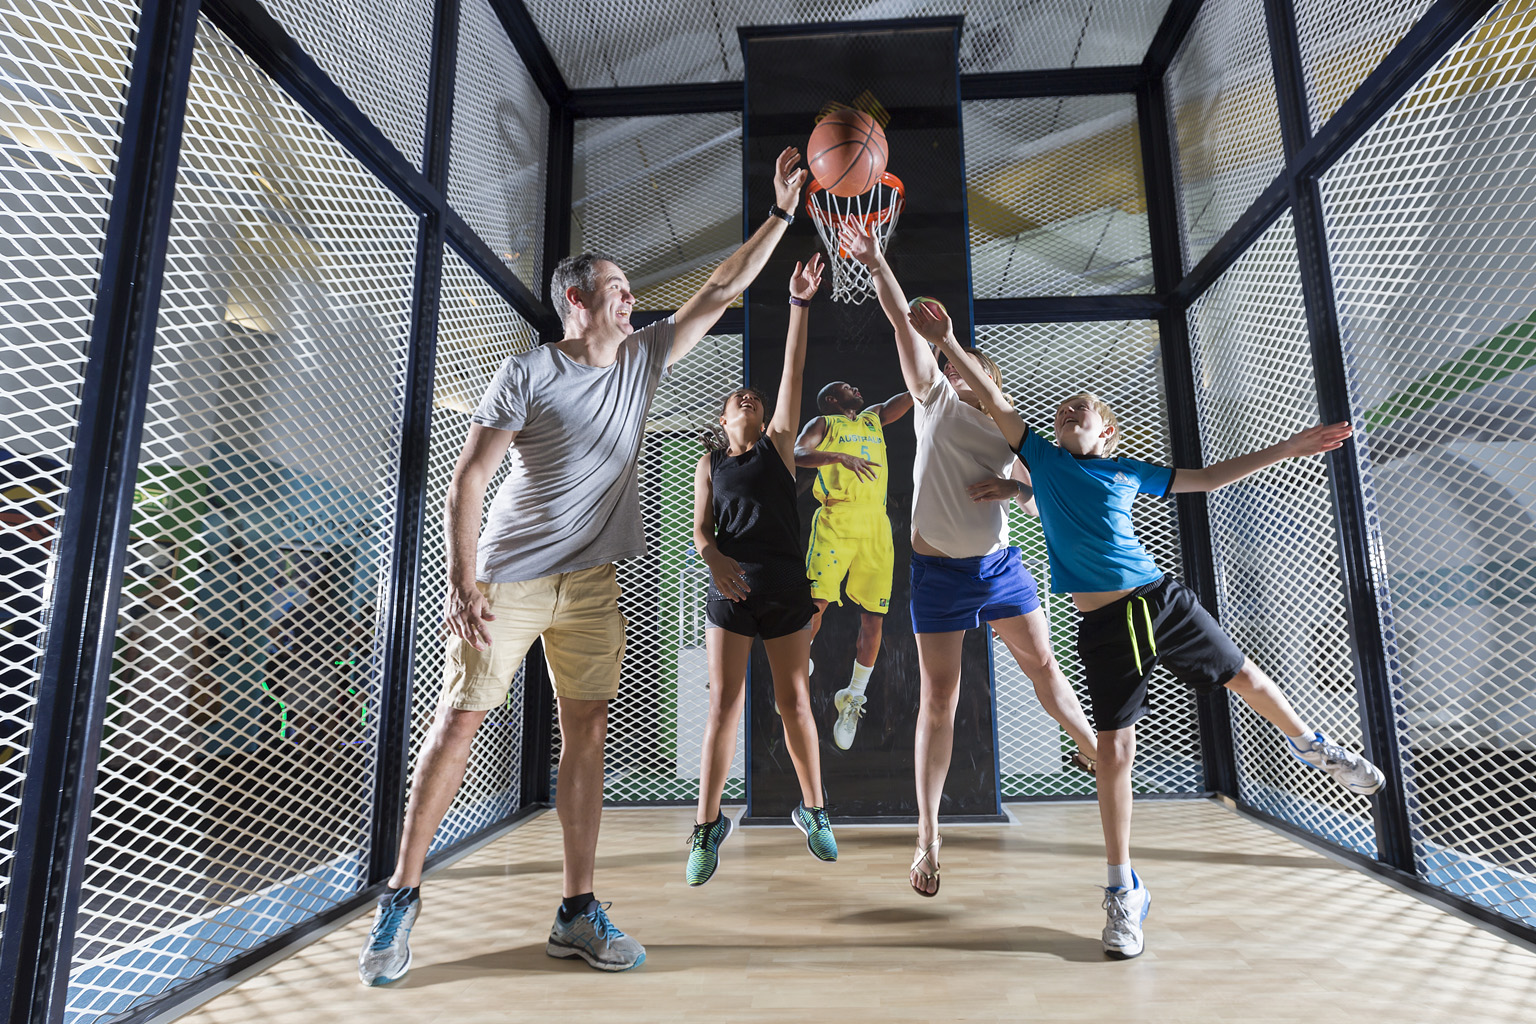 An adult and three children leap for a basketball in front of a basketball ring, inside a caged enclosure at Sportex